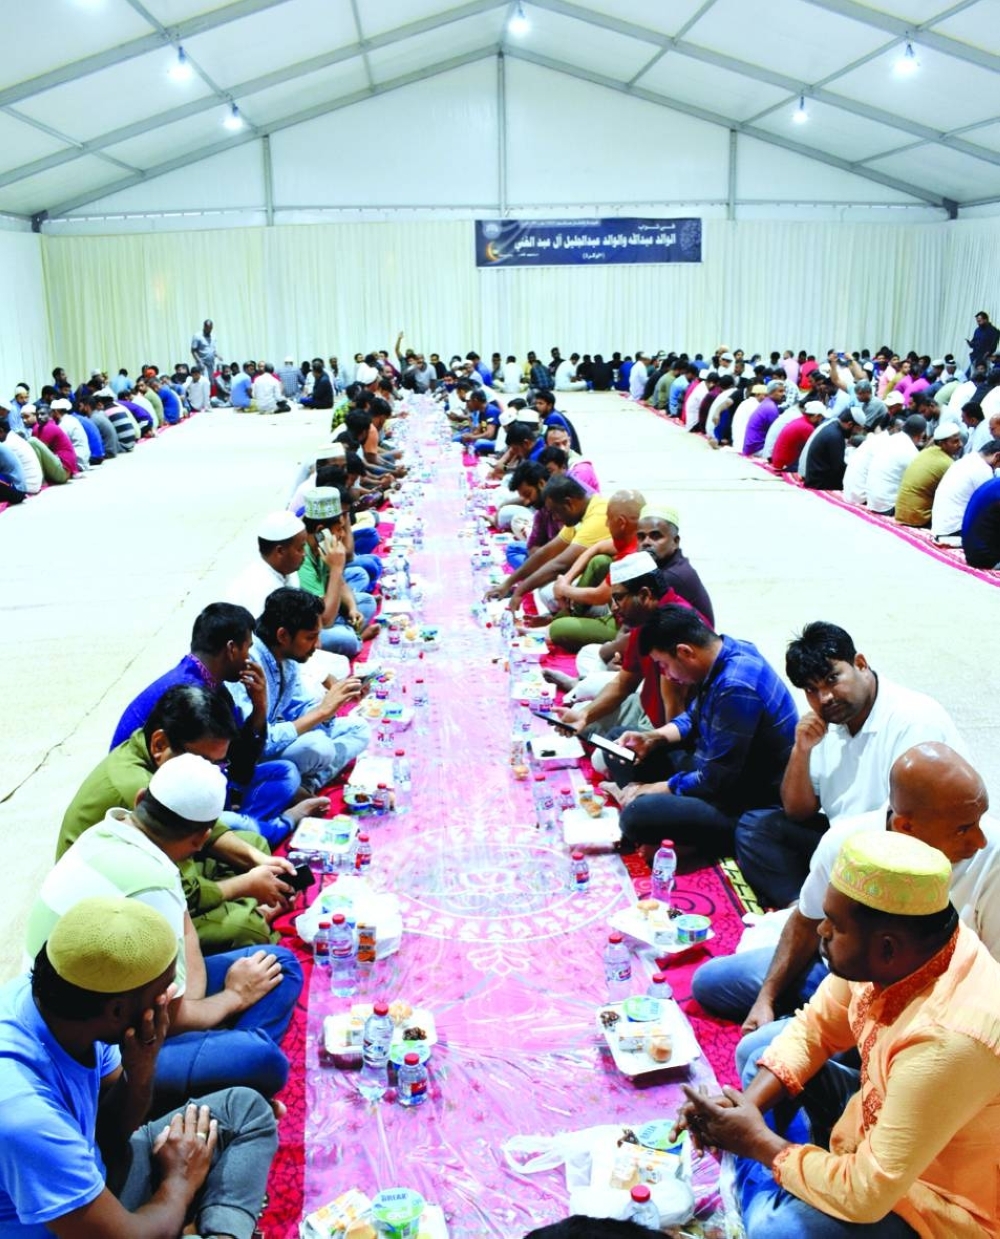 The Iftar tents will support thousands of fasting individuals during the holy month of Ramadan.